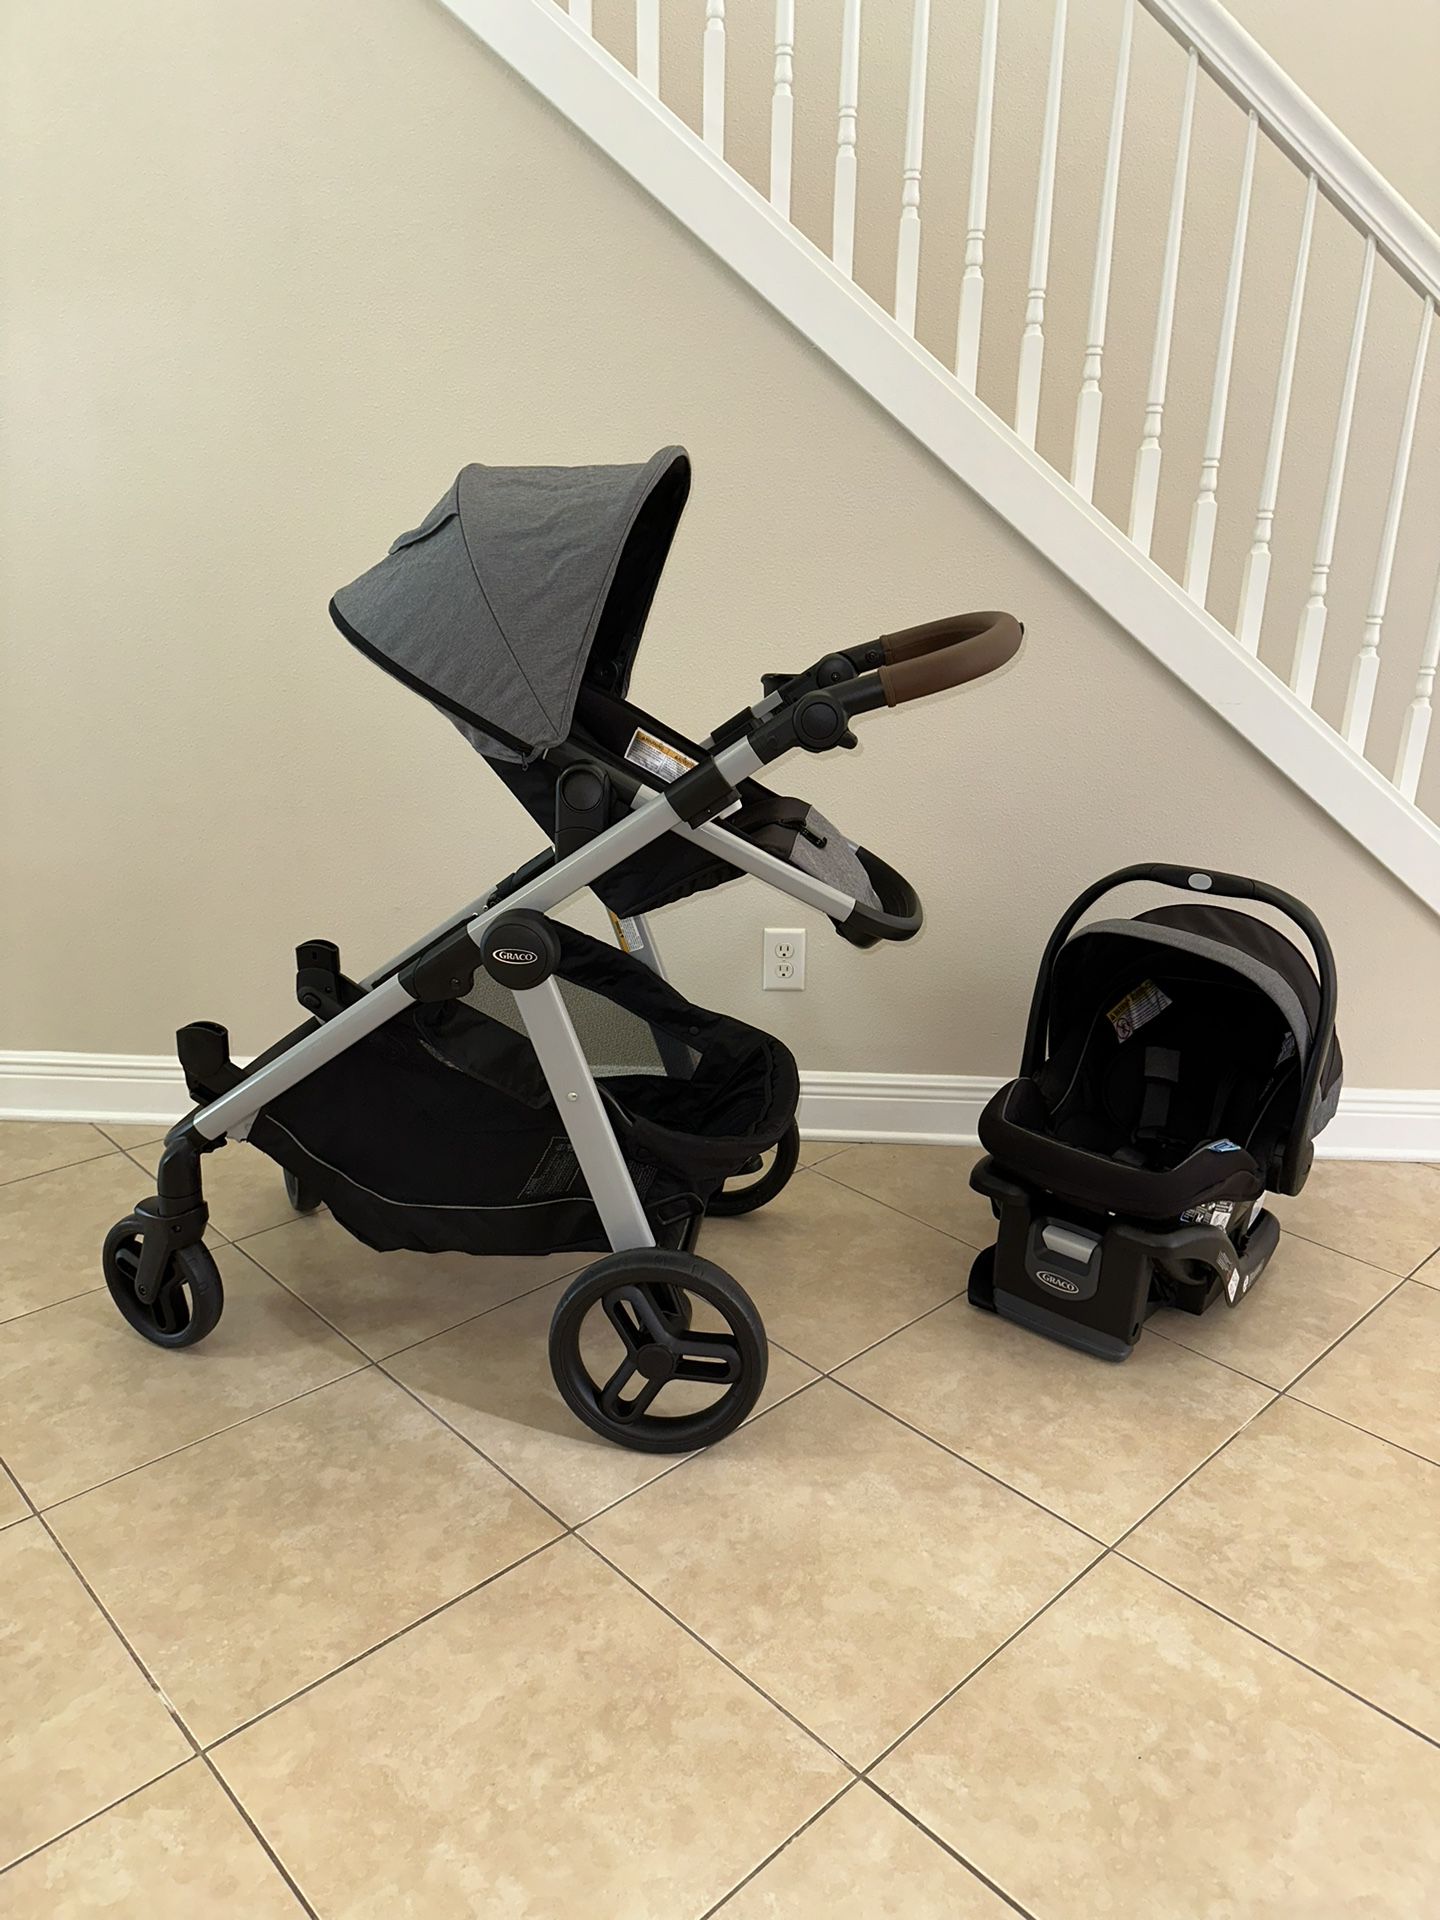 Make An Offer$Graco Modes Nest2Grow Travel System